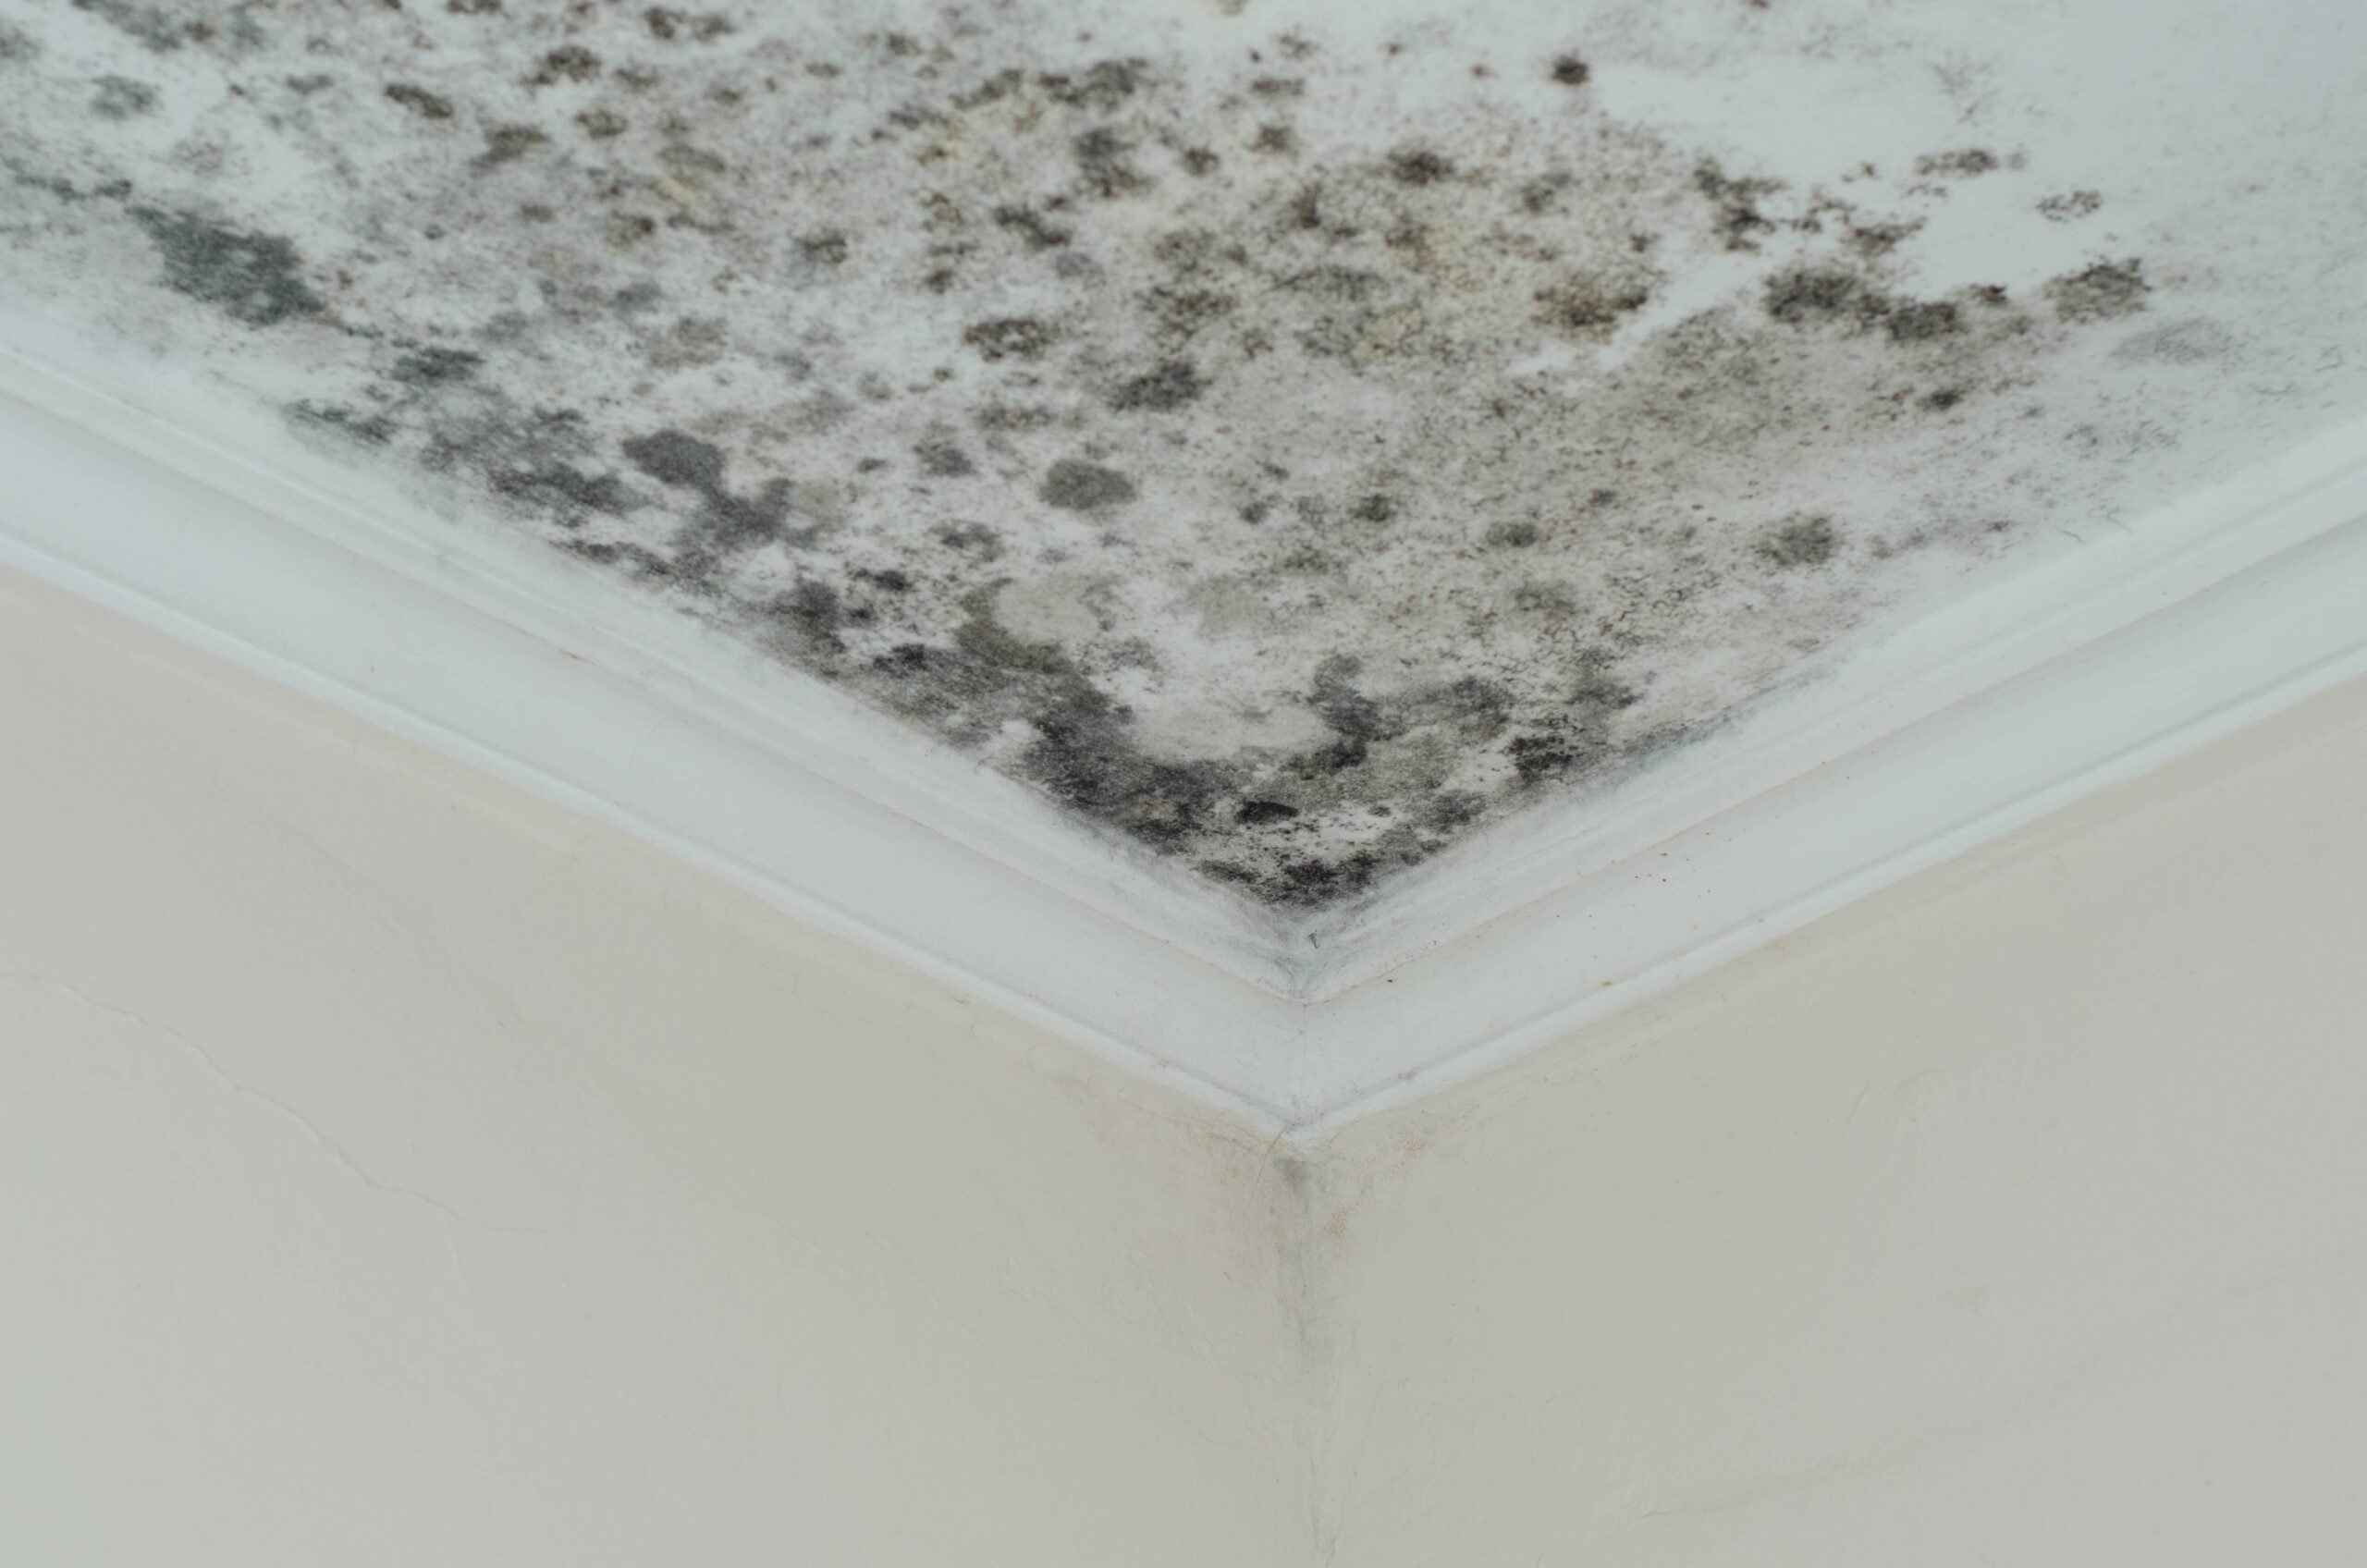 DIY Mold Removal: When to Call in the Professionals